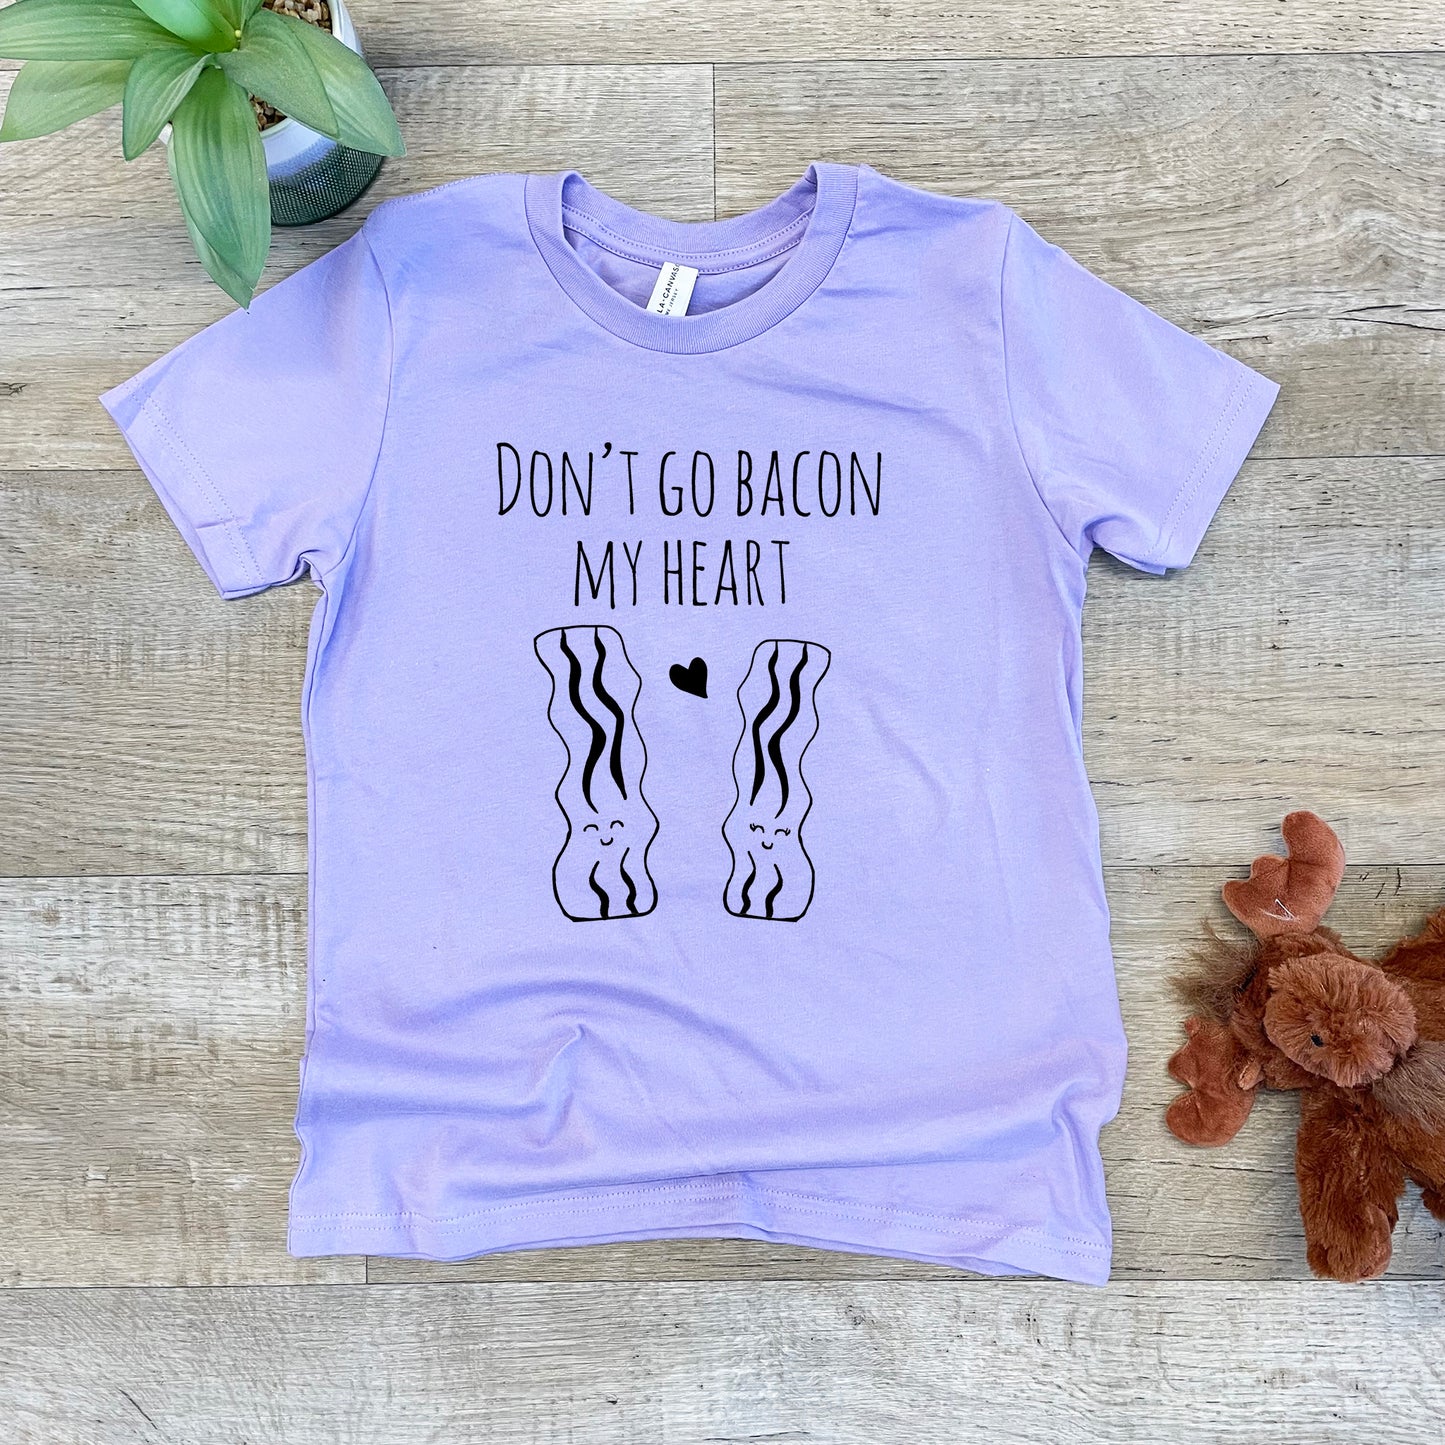 Don't Go Bacon My Heart - Kid's Tee - Columbia Blue or Lavender